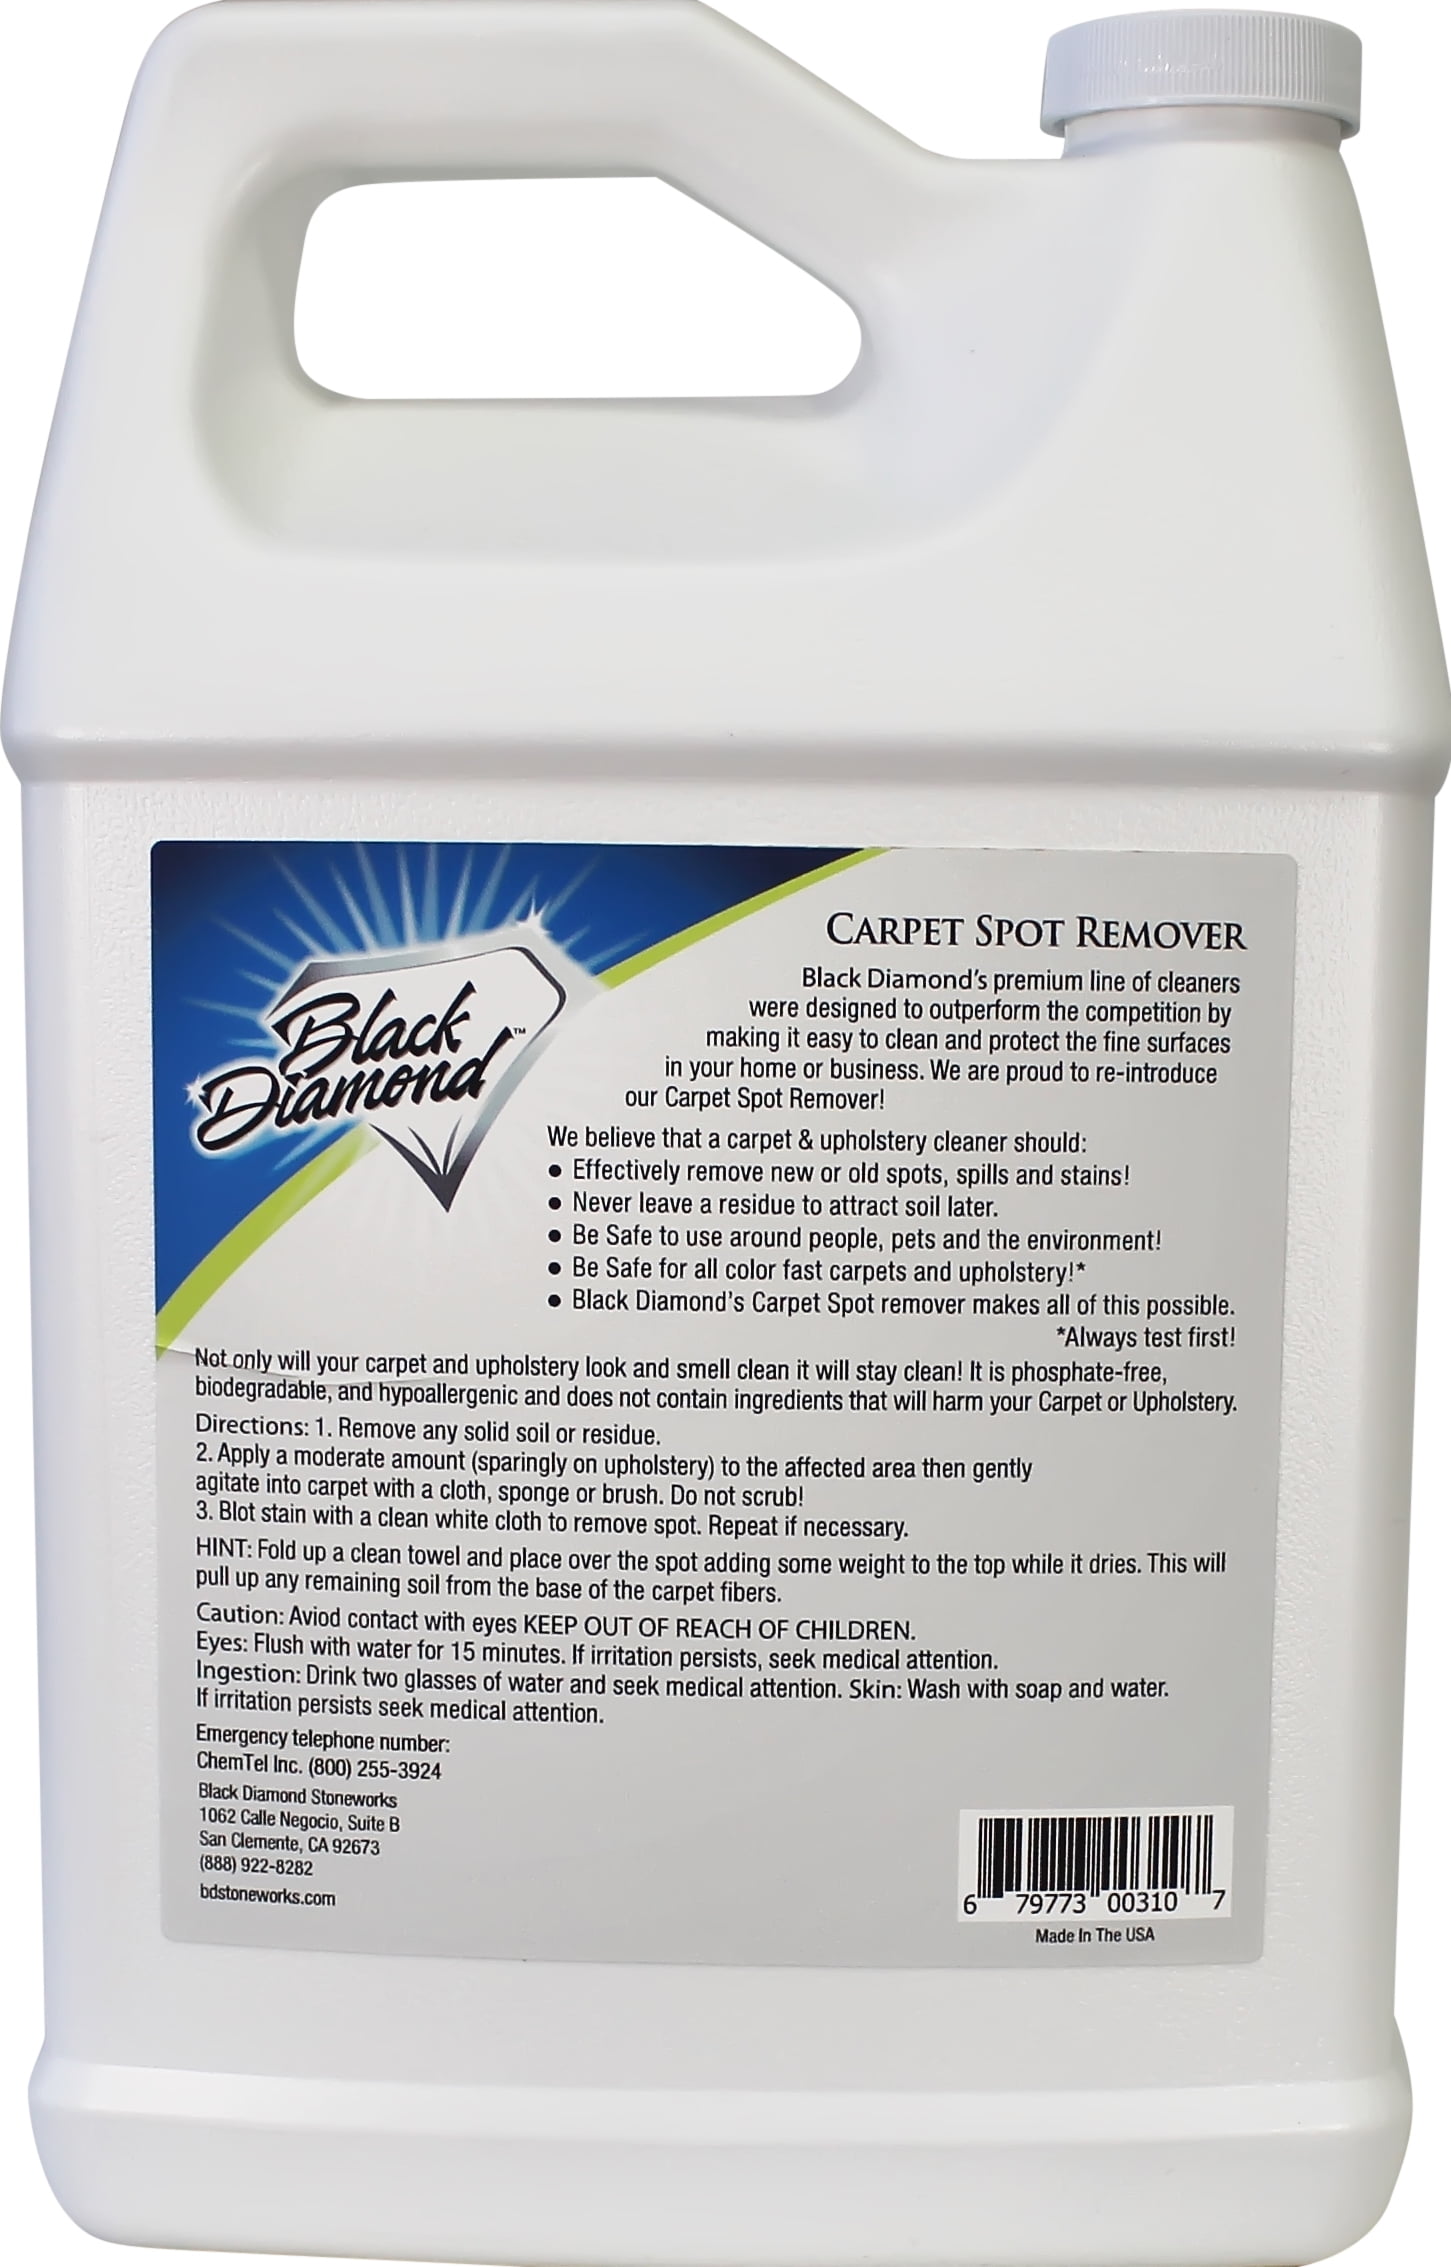 Black Diamond Stoneworks Carpet & Upholstery Cleaner: This Fast Acting Deep  Cleaning Spot & Stain Remover Spray Also Works Great on Rugs, Couches and